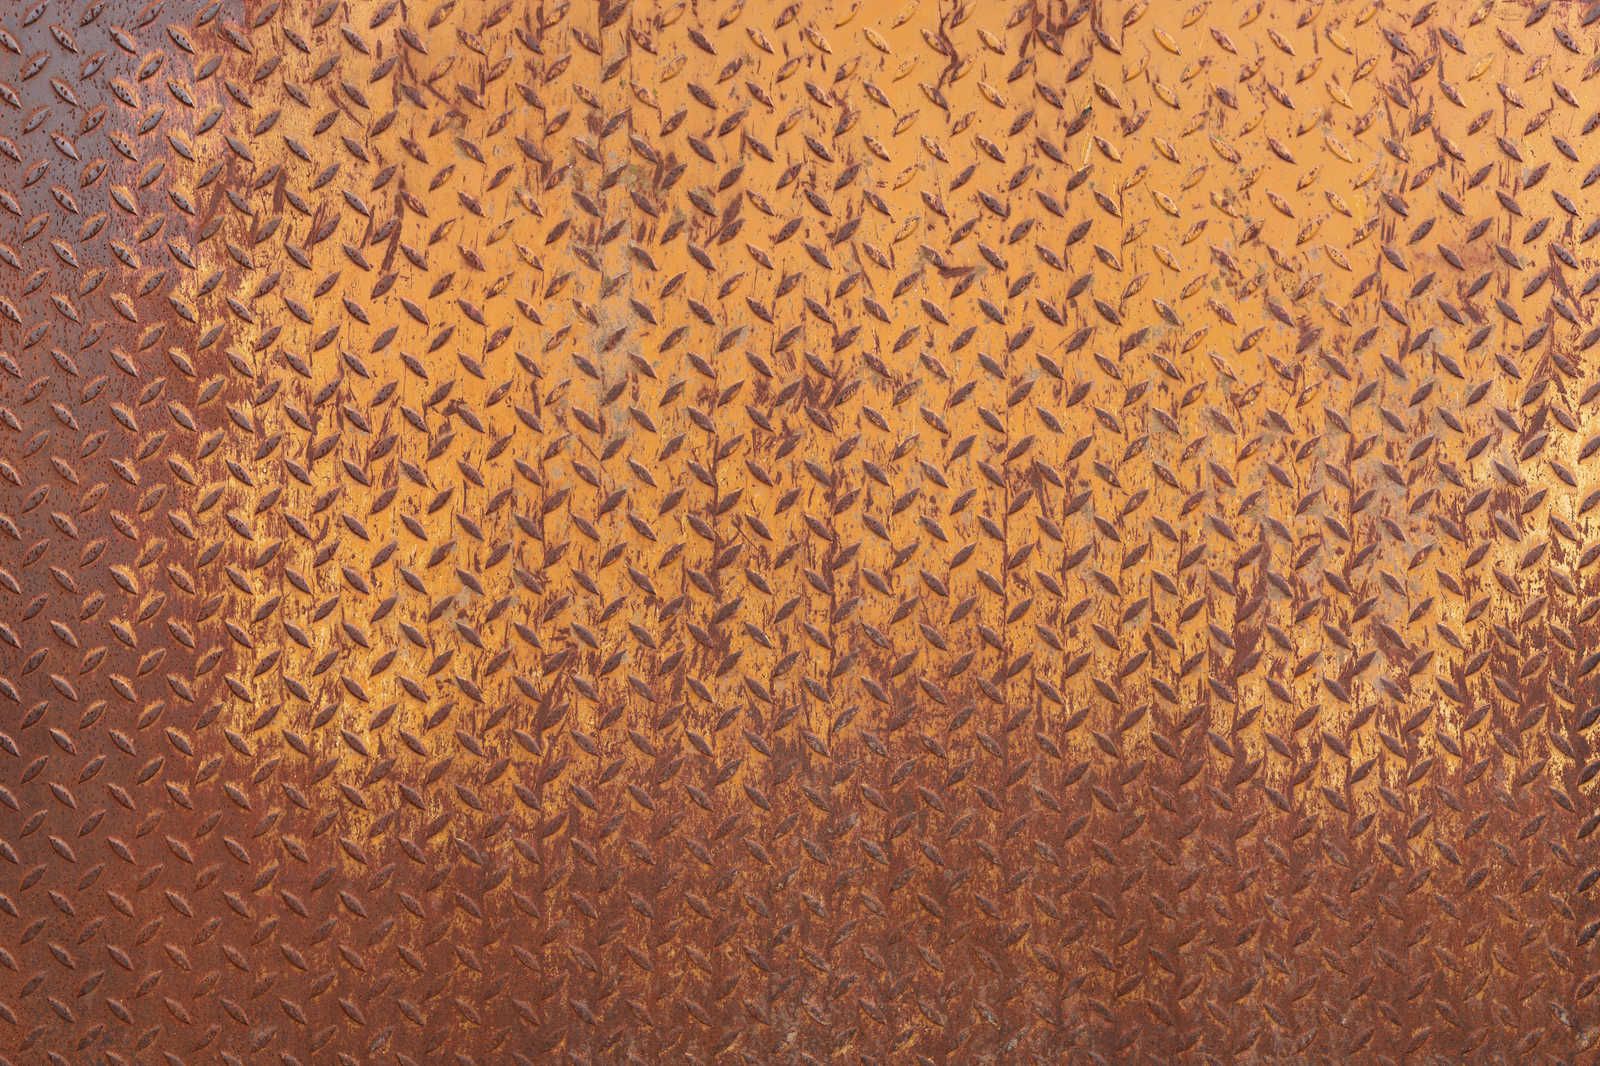             Metal Canvas Painting Steel Plate Rust with Diamond Pattern - 0.90 m x 0.60 m
        